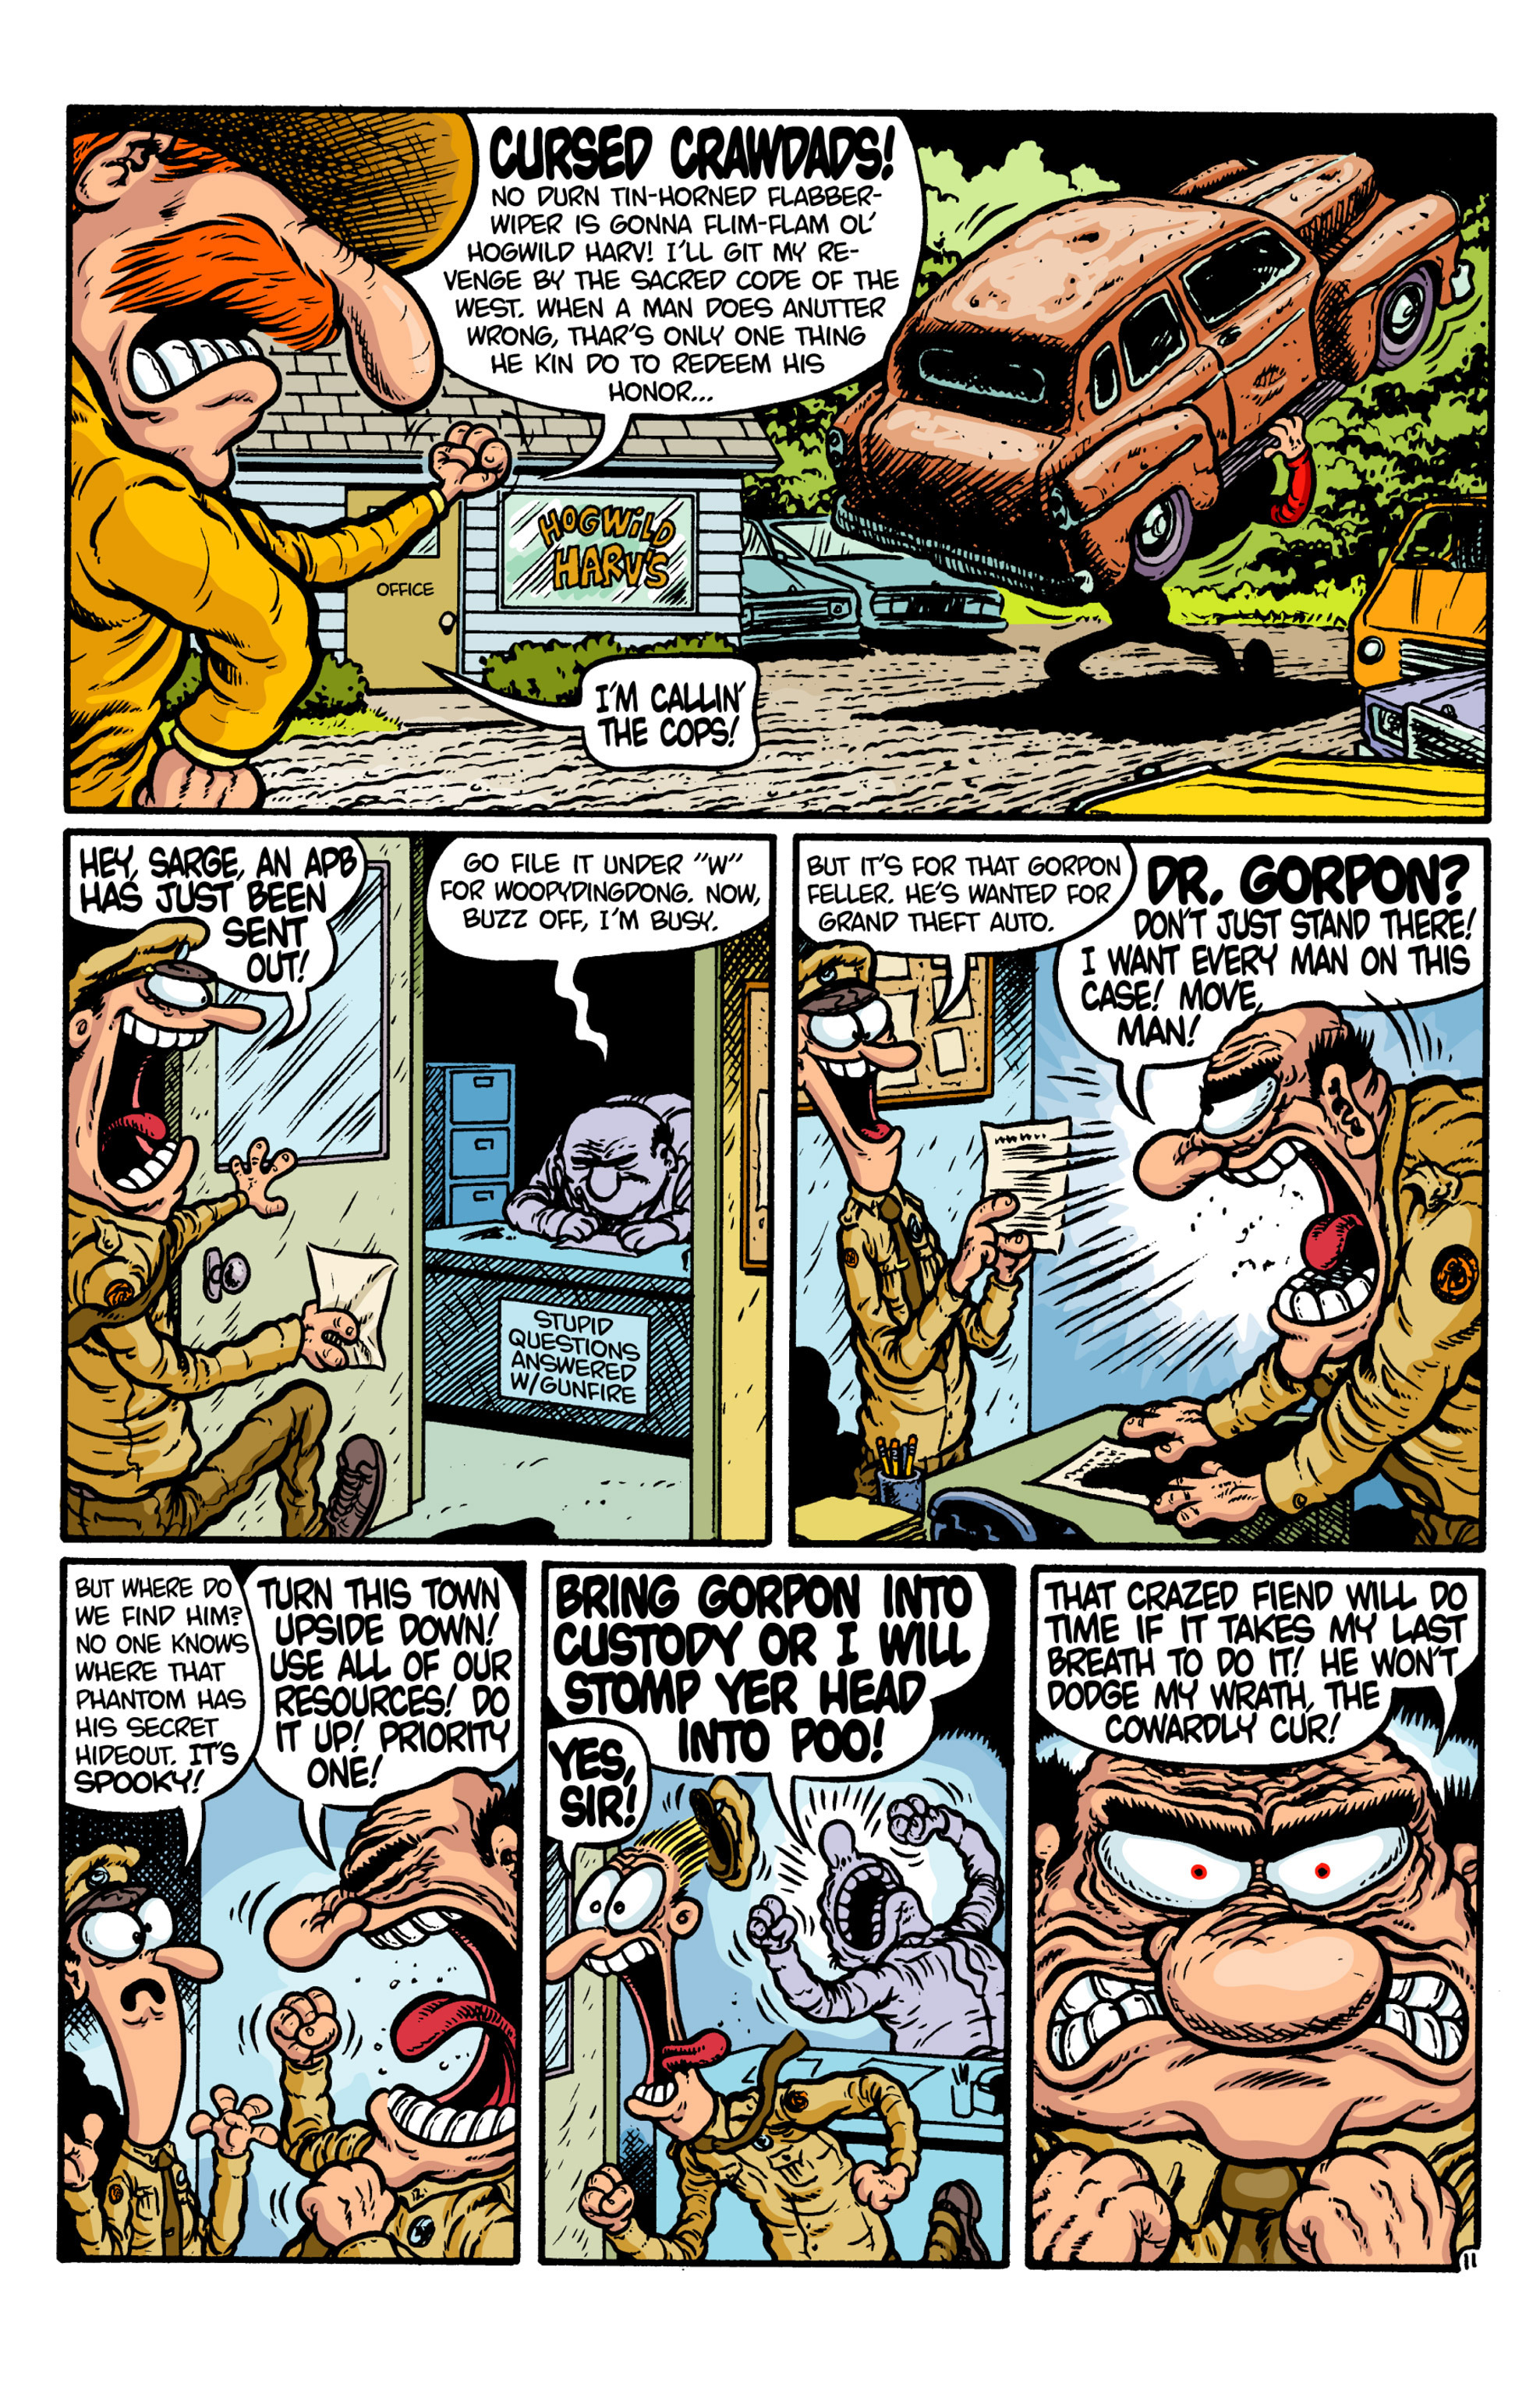 Read online Doctor Gorpon comic -  Issue #1 - 13